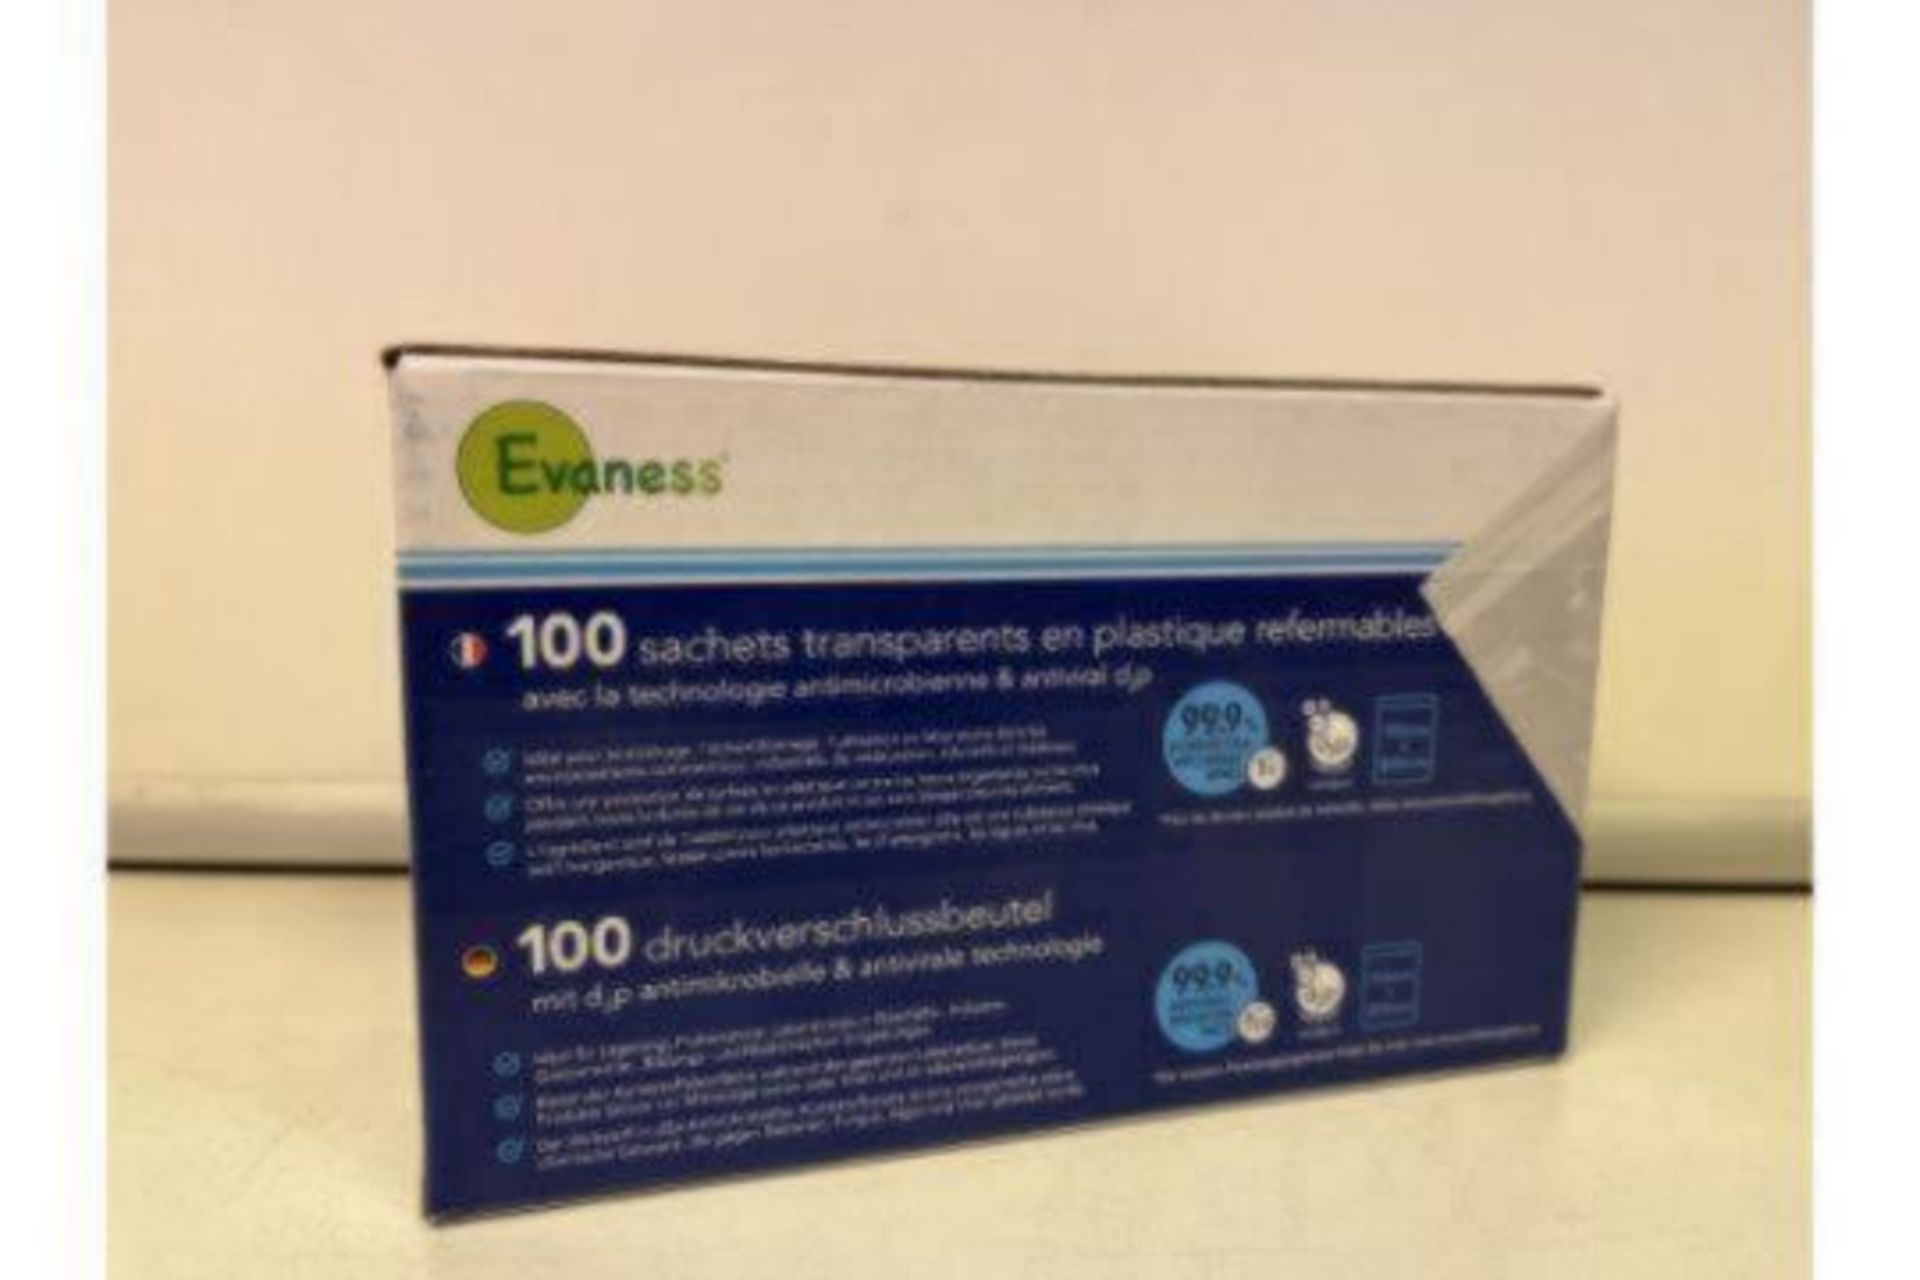 50 x NEW BOXES OF 100 EVANESS GRIP SEAL BAGS WITH D2P ANTIMICROBIAL & ANTIVIRAL TECHNOLOGY. EACH BAG